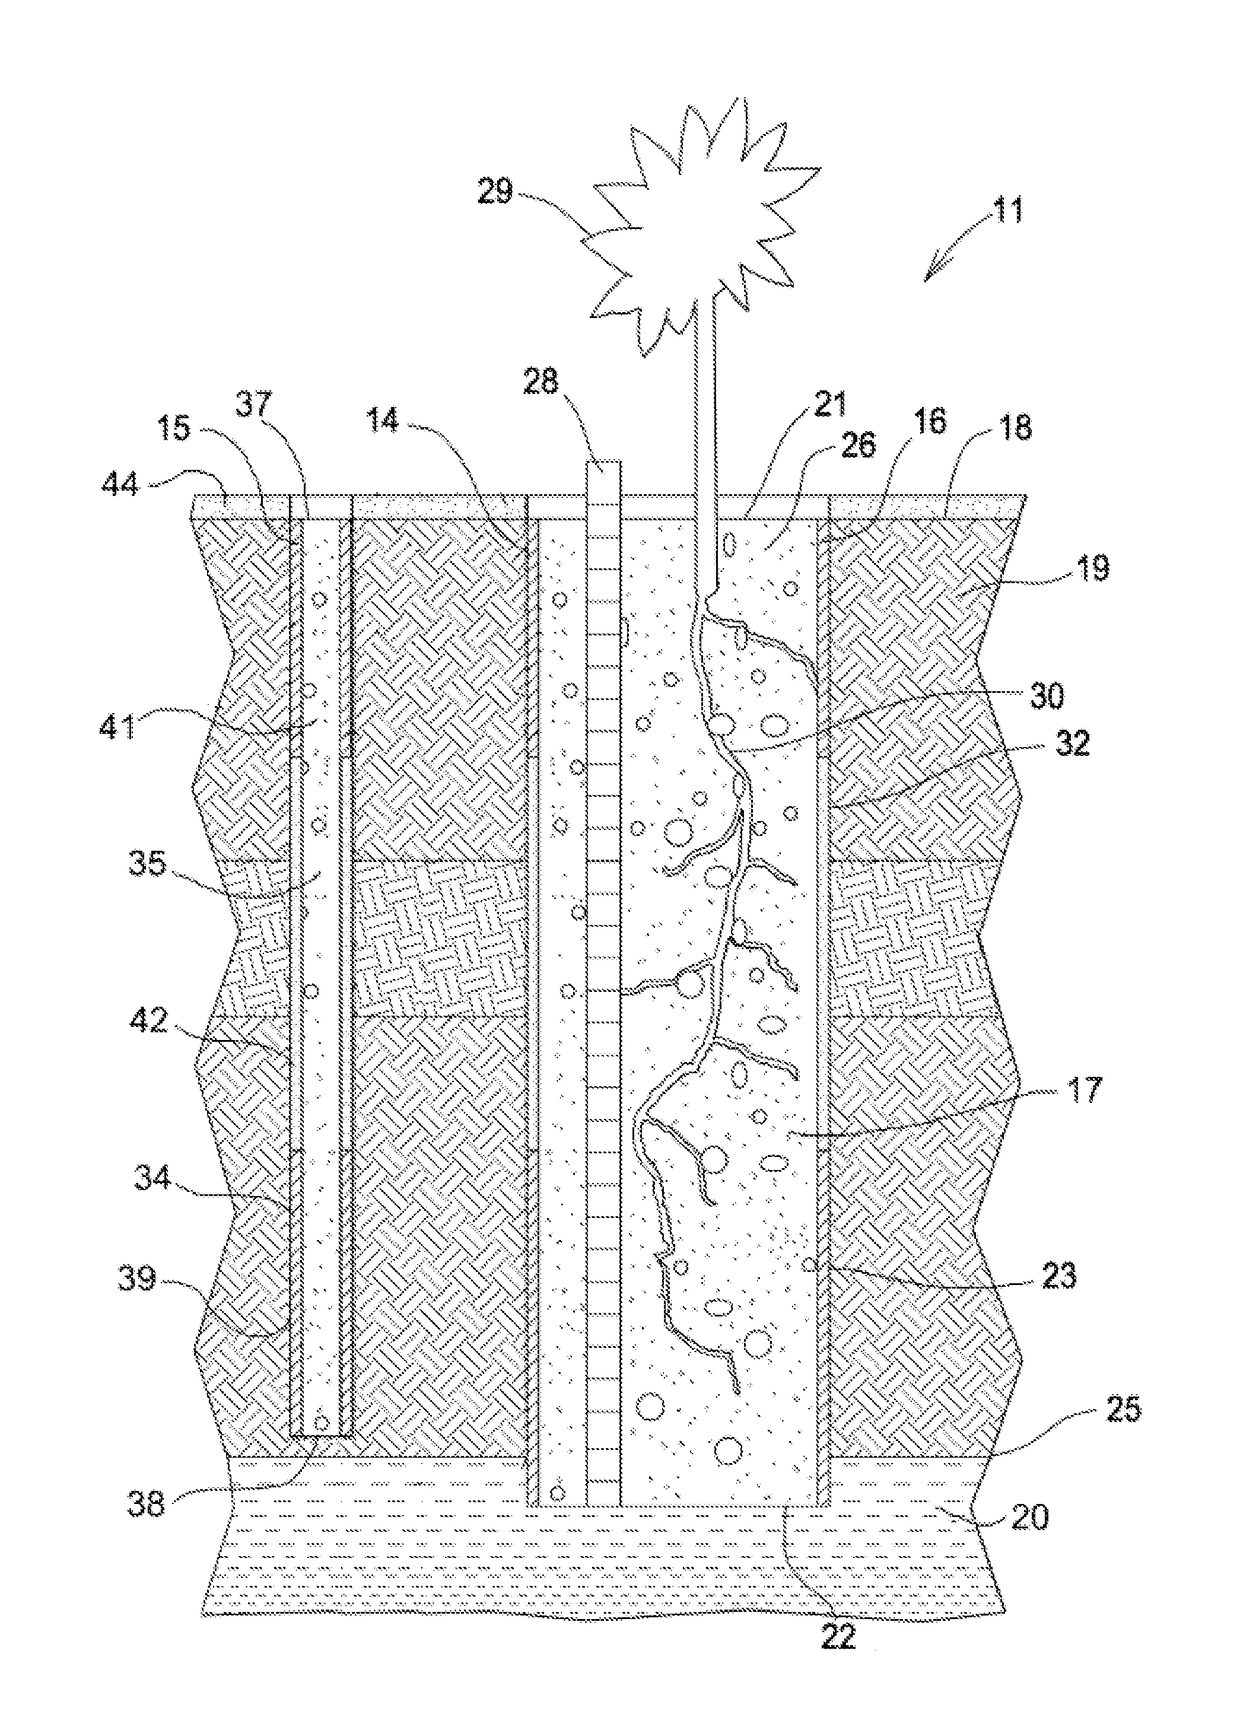 Soil gas and groundwater remediation system and method